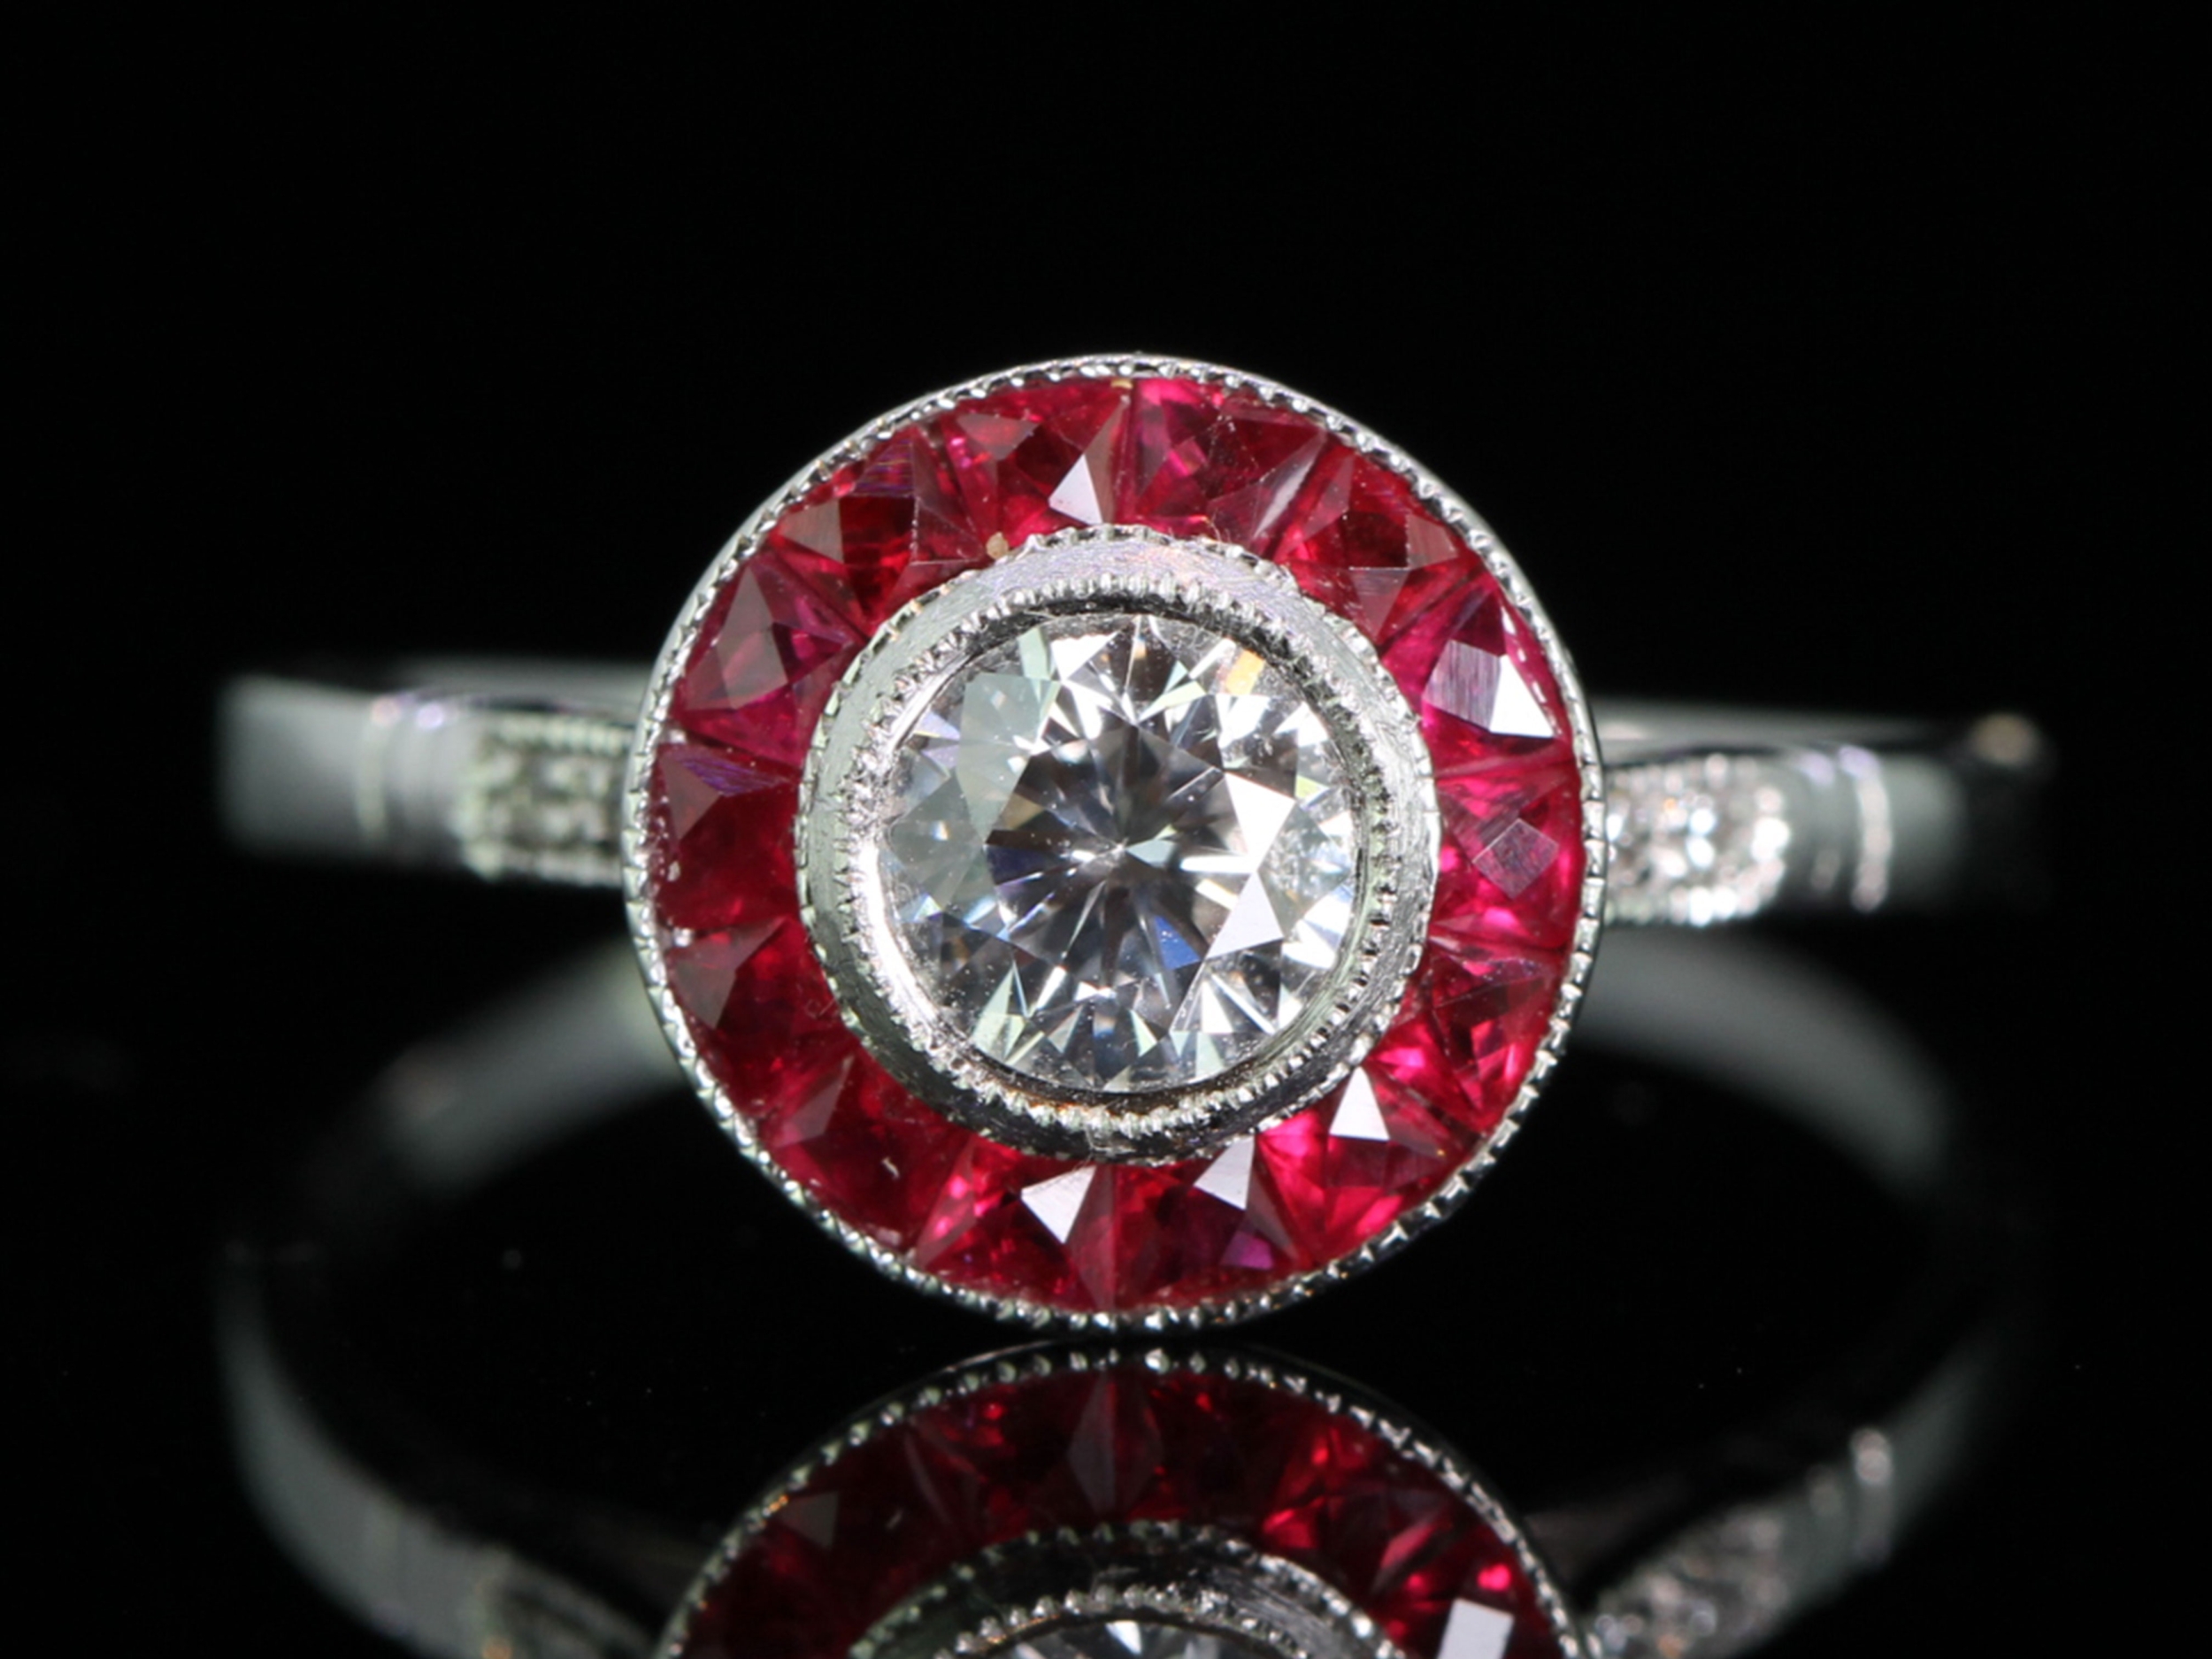 Art deco style .43 carat center vintage diamond and ruby ring